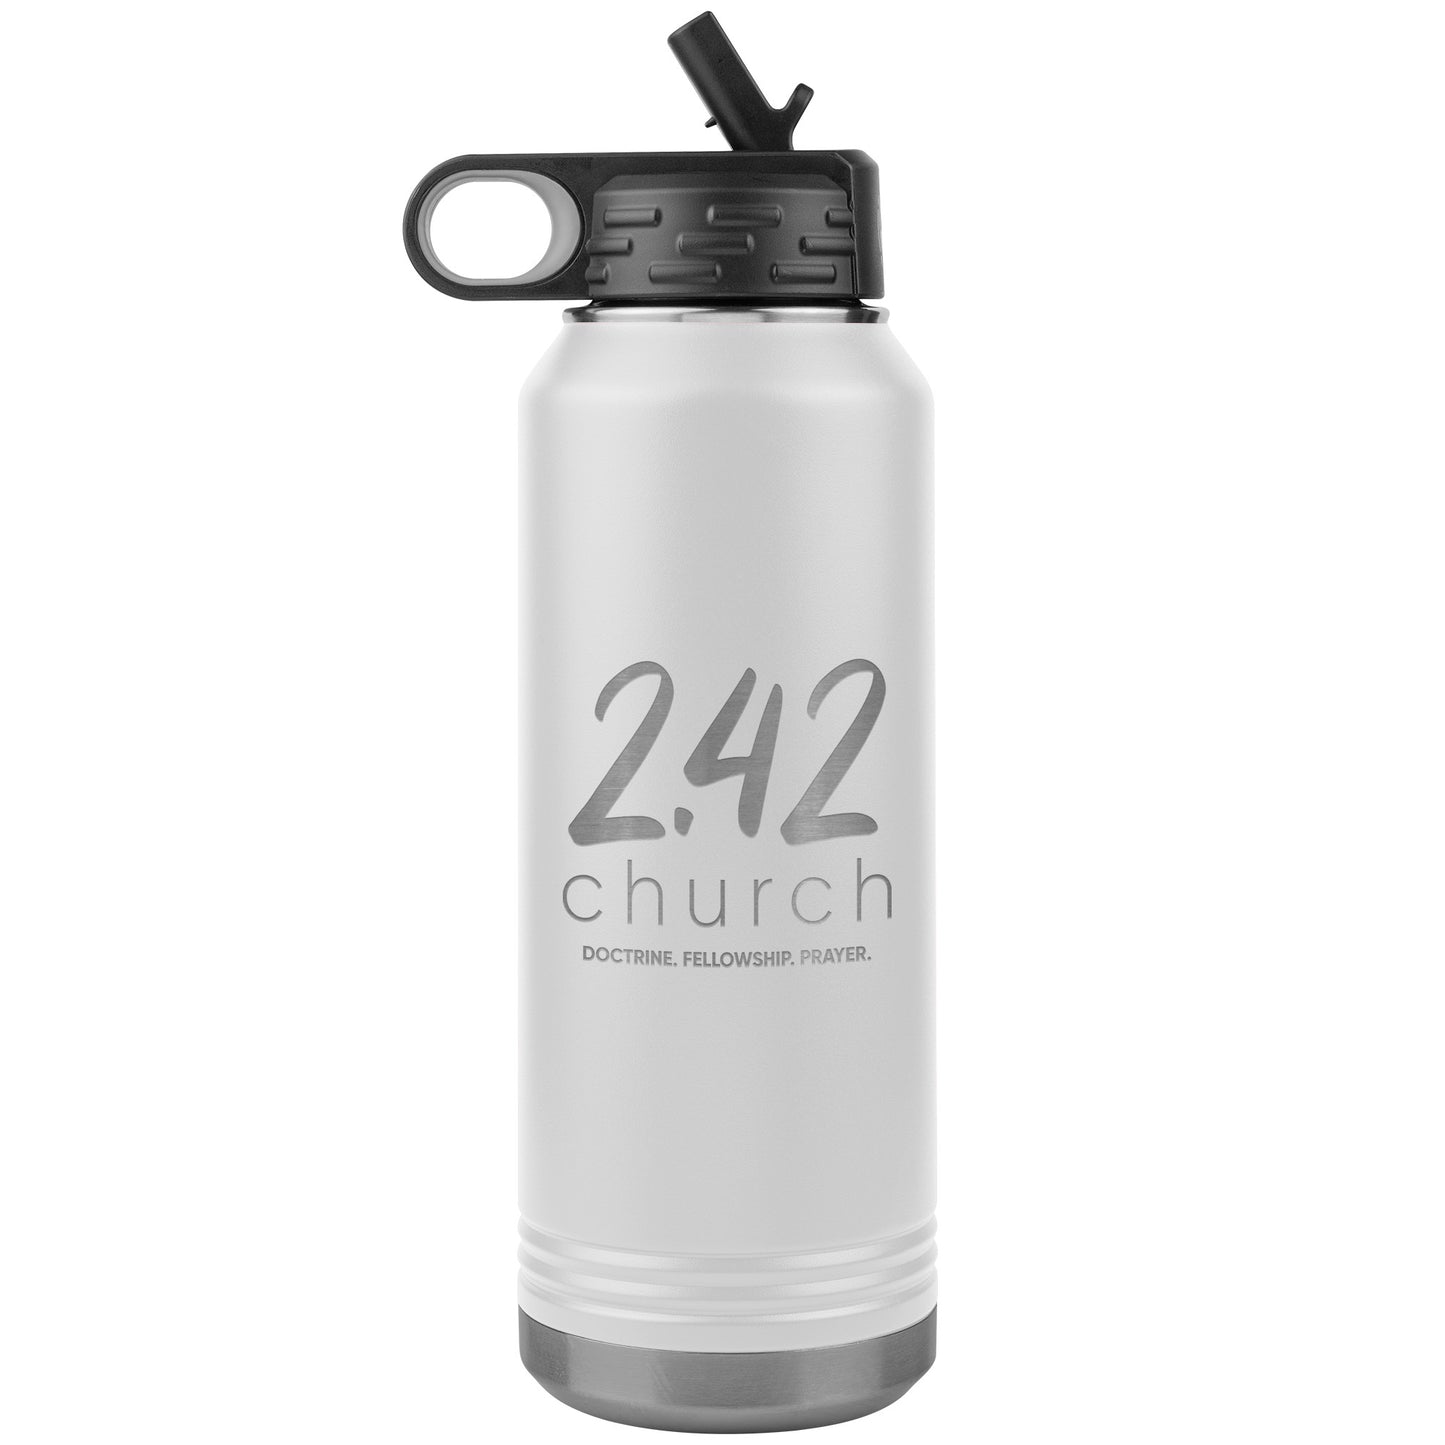 2.42 Church Insulated Water Bottle